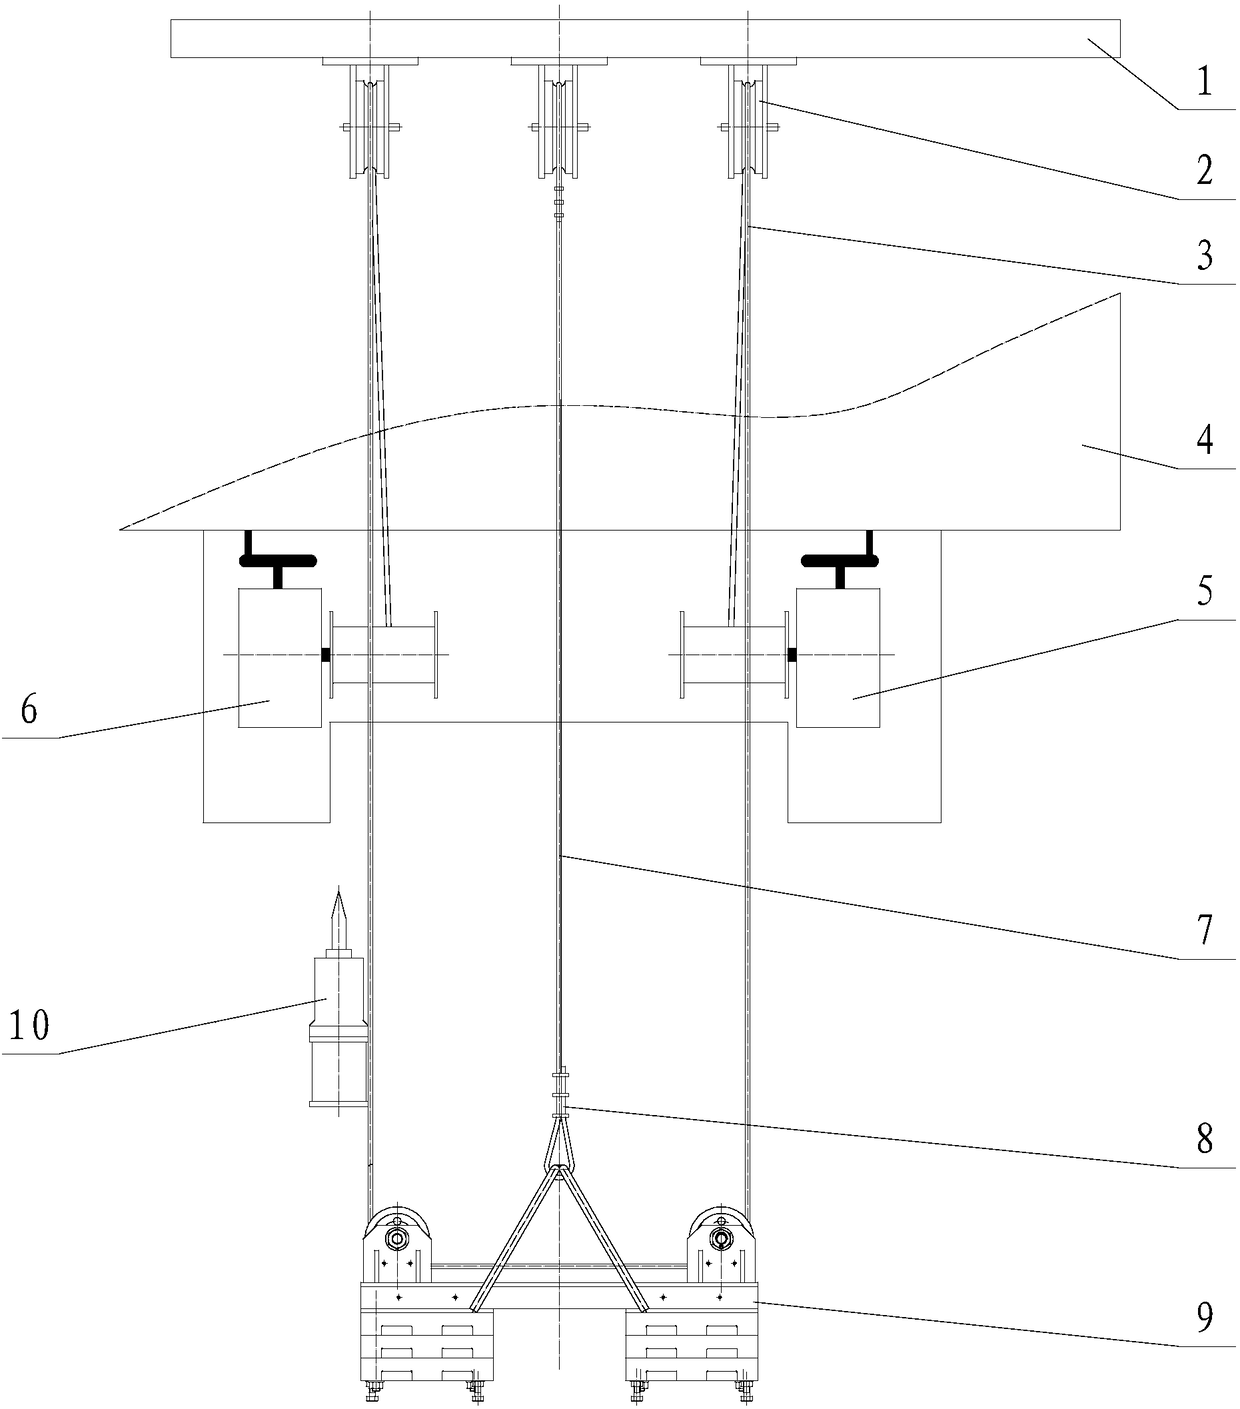 Double-winch marine hydrological observation system and method based on offshore oil platform